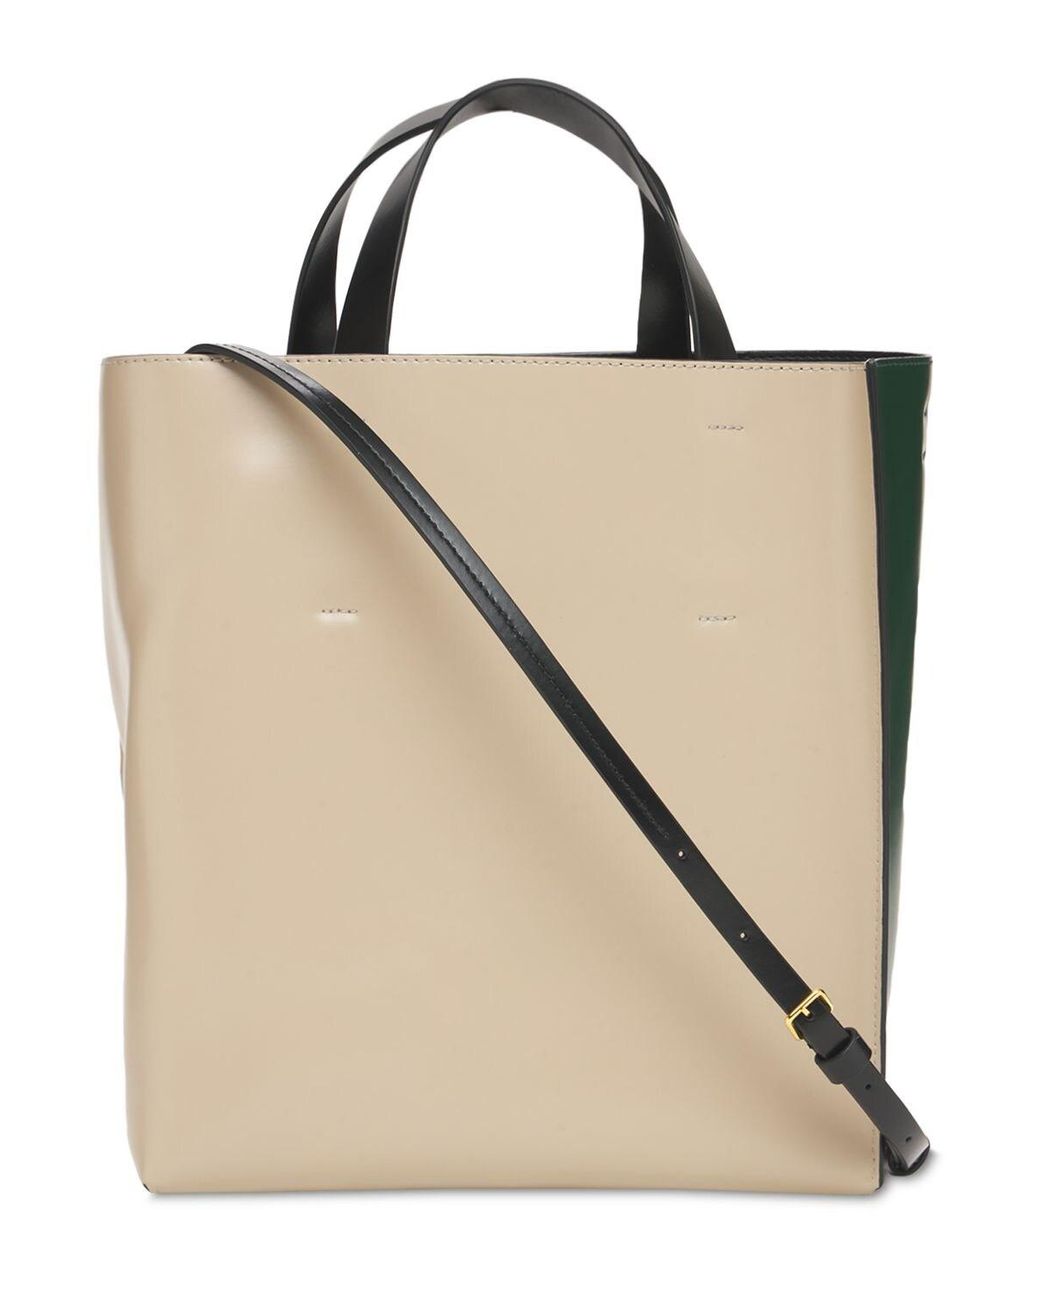 Marni Small Museo Leather Tote Bag W/pocket in Green | Lyst Canada